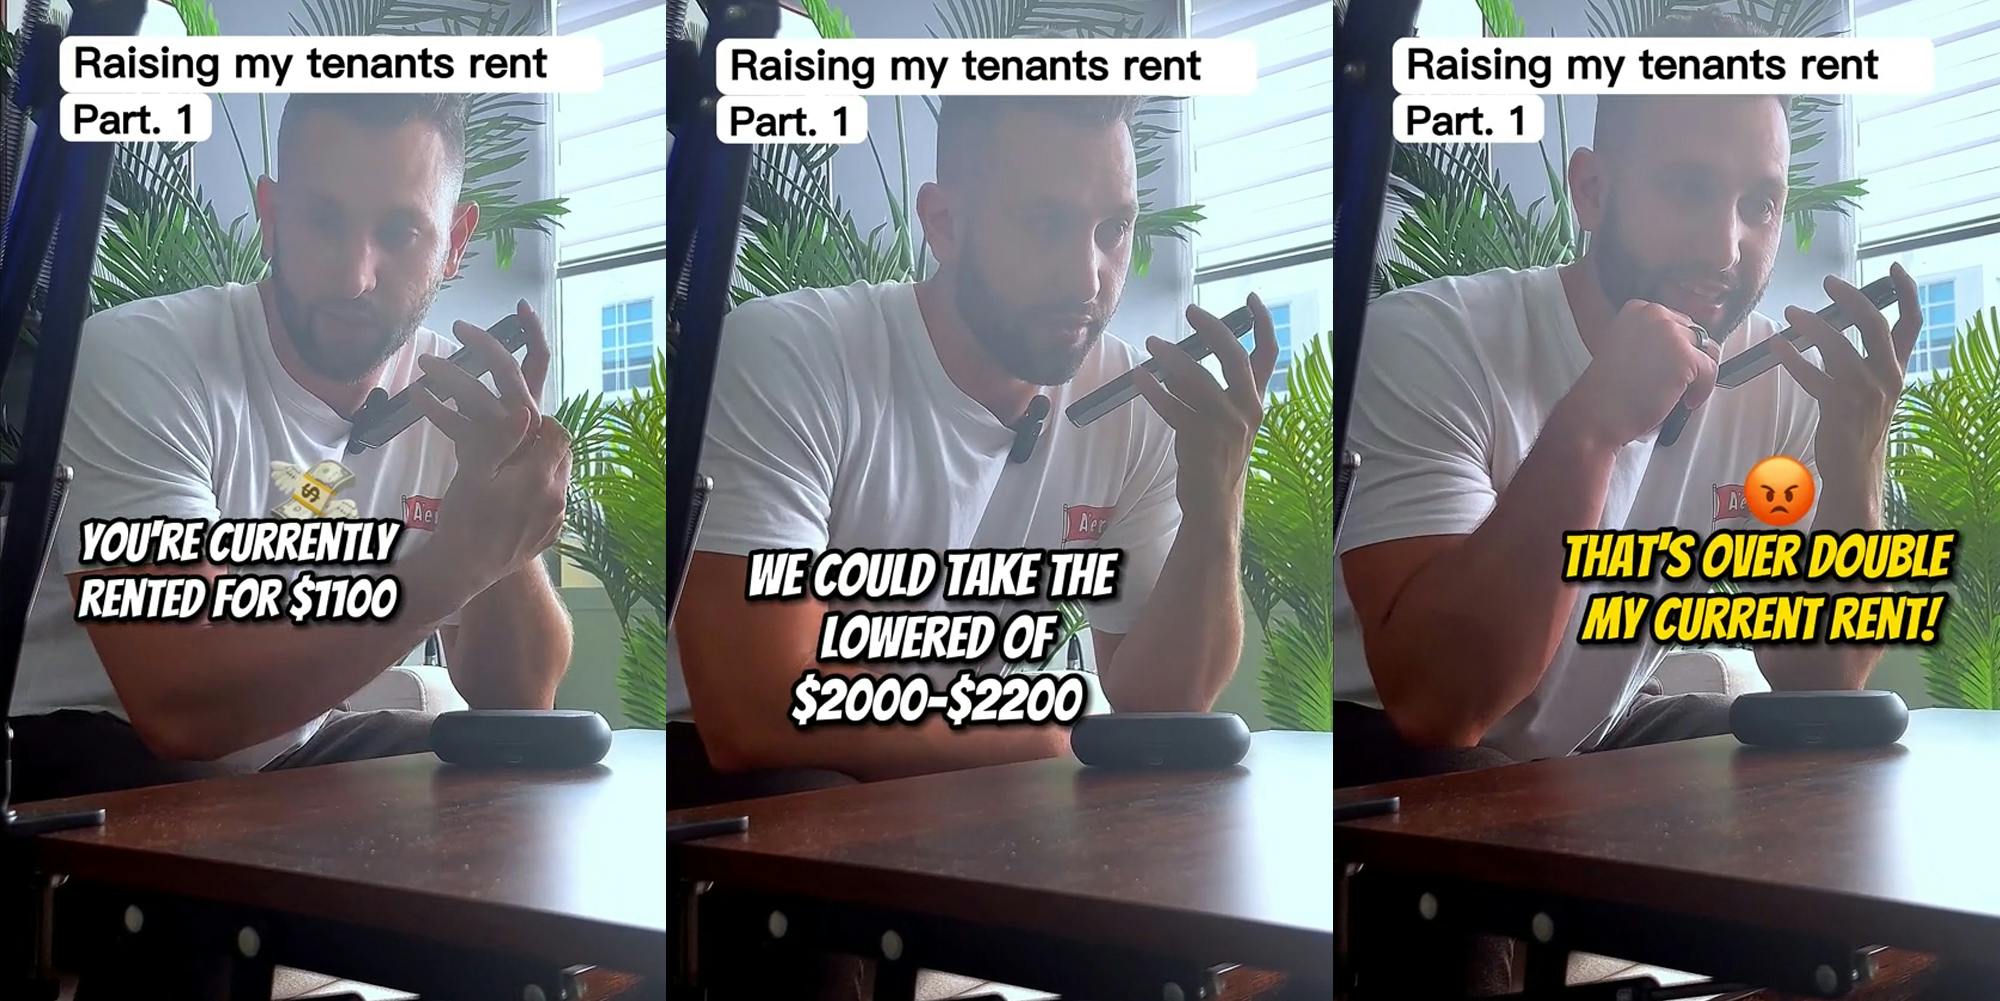 landlord speaking to tenant on phone with captions "Raising my tenants rent Part. 1" "You're currently rented for $1100" (l) landlord speaking to tenant on phone with captions "Raising my tenants rent Part. 1" "We could take the lowered end of $2000-$2200" (c) landlord speaking to tenant on phone with captions "Raising my tenants rent Part. 1" "That's over double my current rent!" (r)